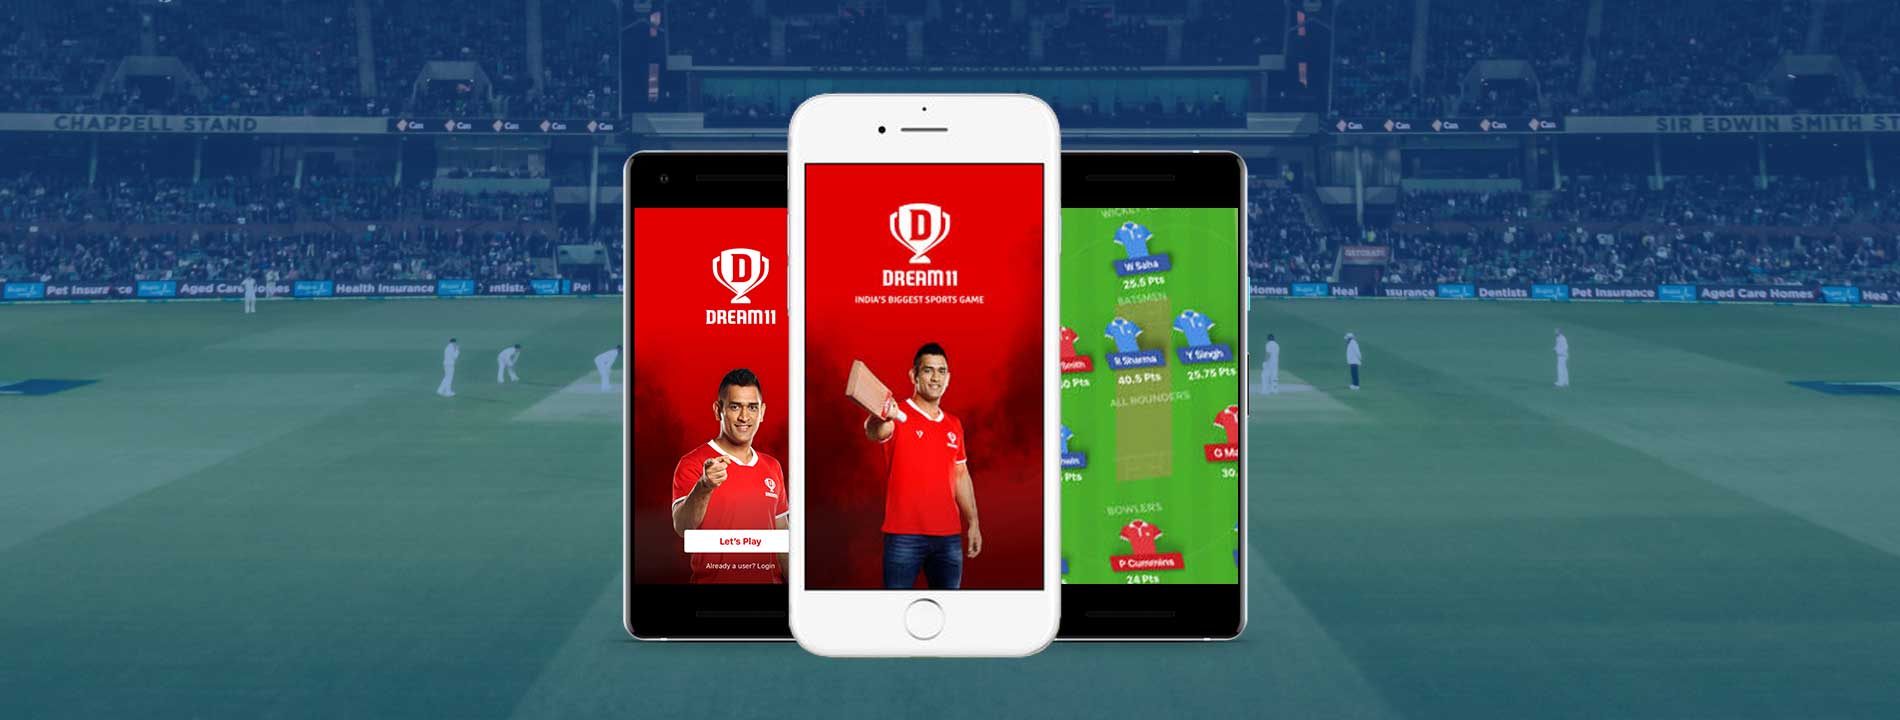 Dream 11 – A Great App For Cricket Fans Everywhere